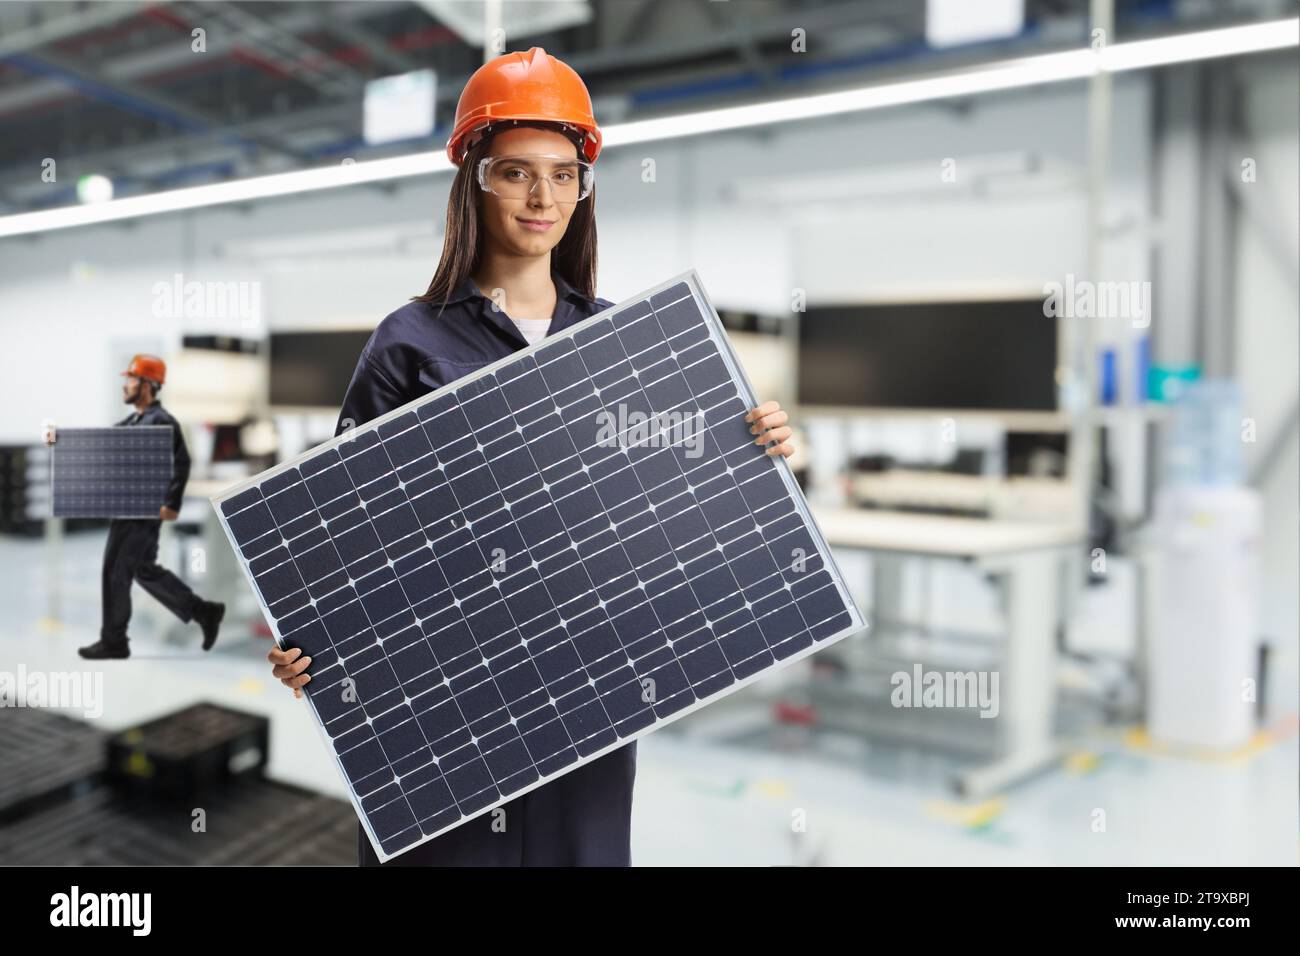 Solar panel production line, female worker in a factory holding a photovoltaic Stock Photo